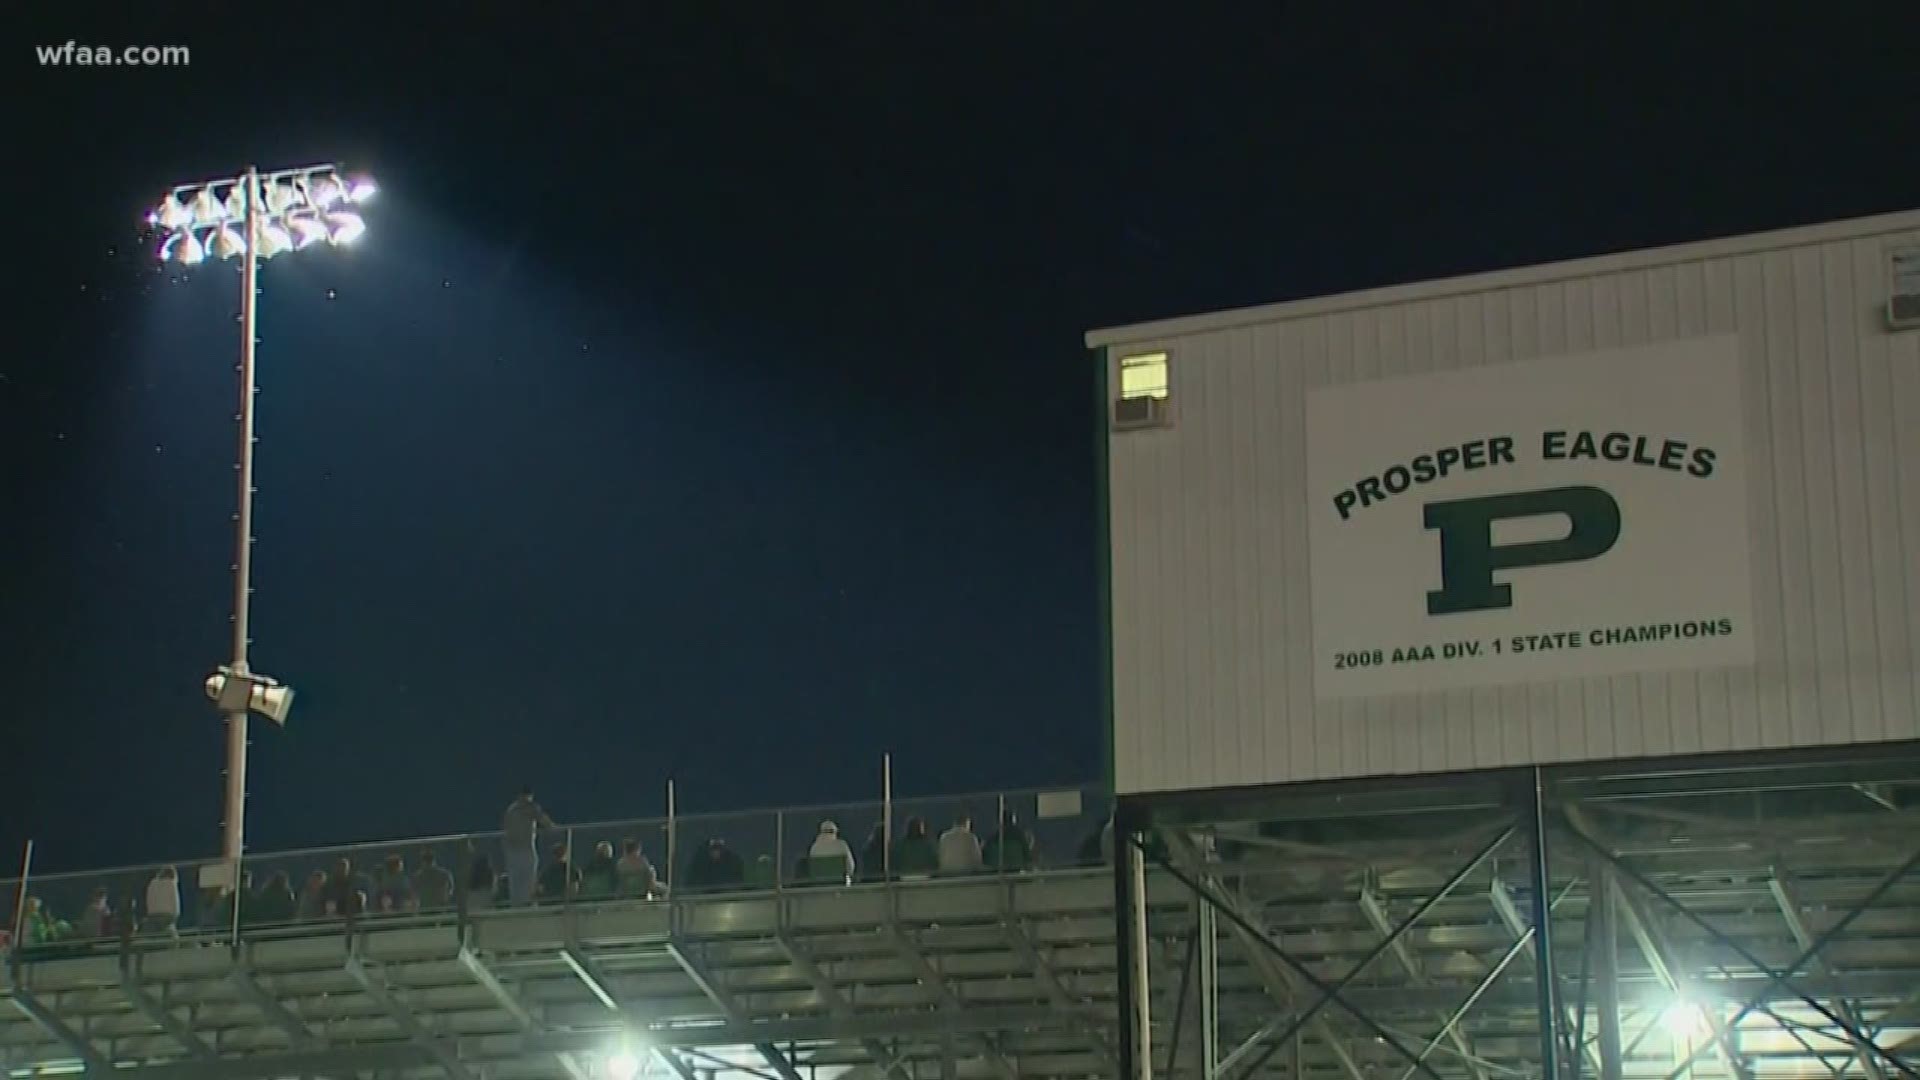 Prosper's Eagle Stadium near the middle school may have played its last game. That's tough news for some residents who have been going to games for nearly 3 decades.